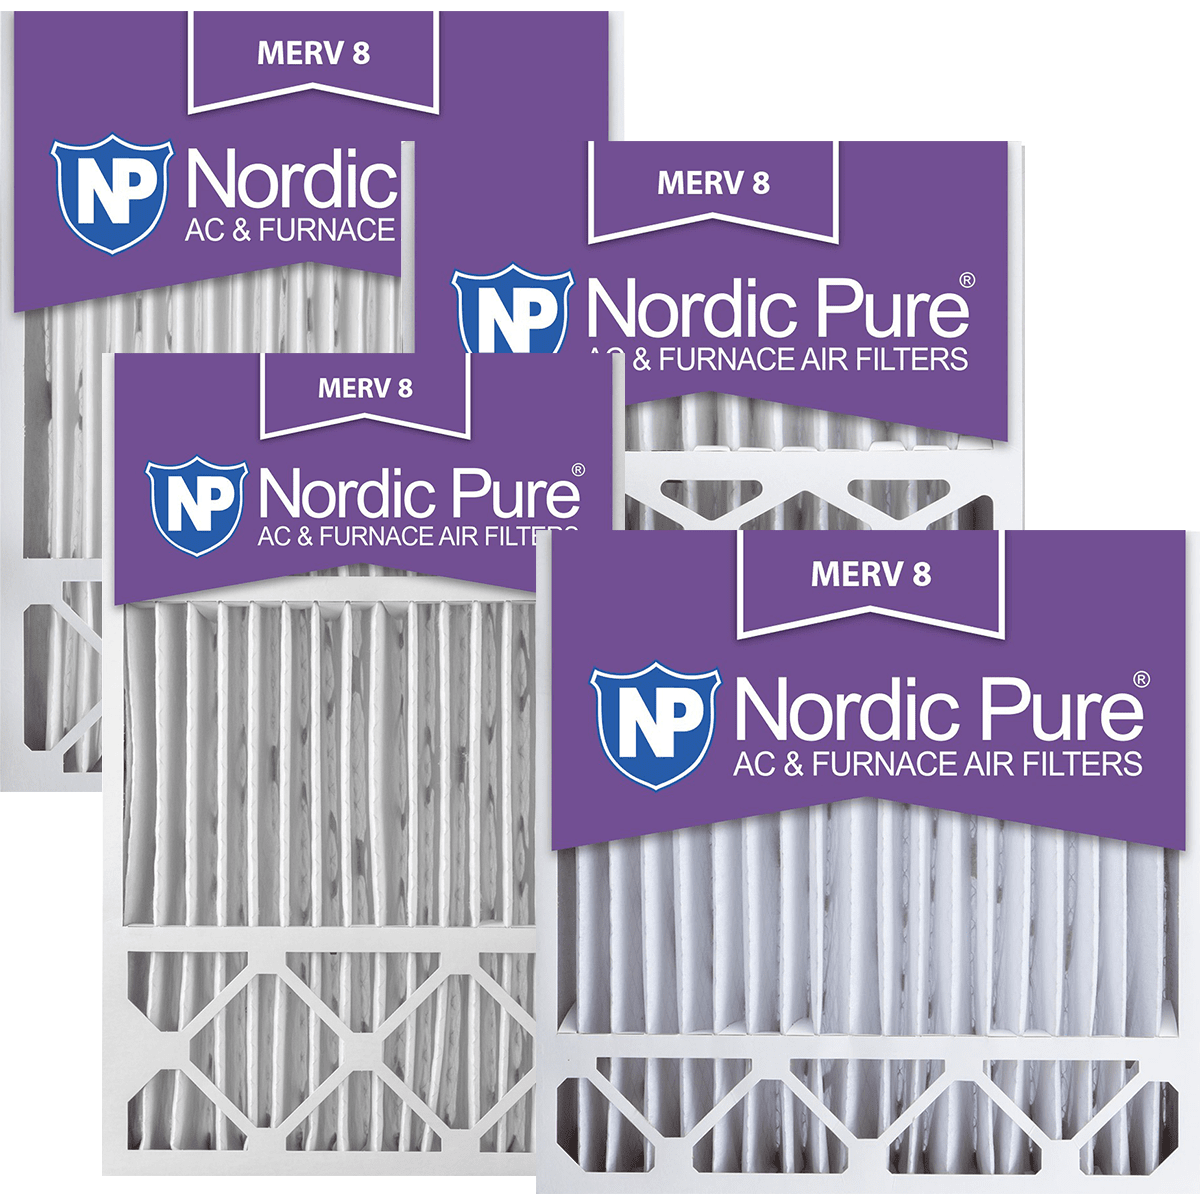 Nordic Pure Merv 8 5-in. Pleated Furnace Filters